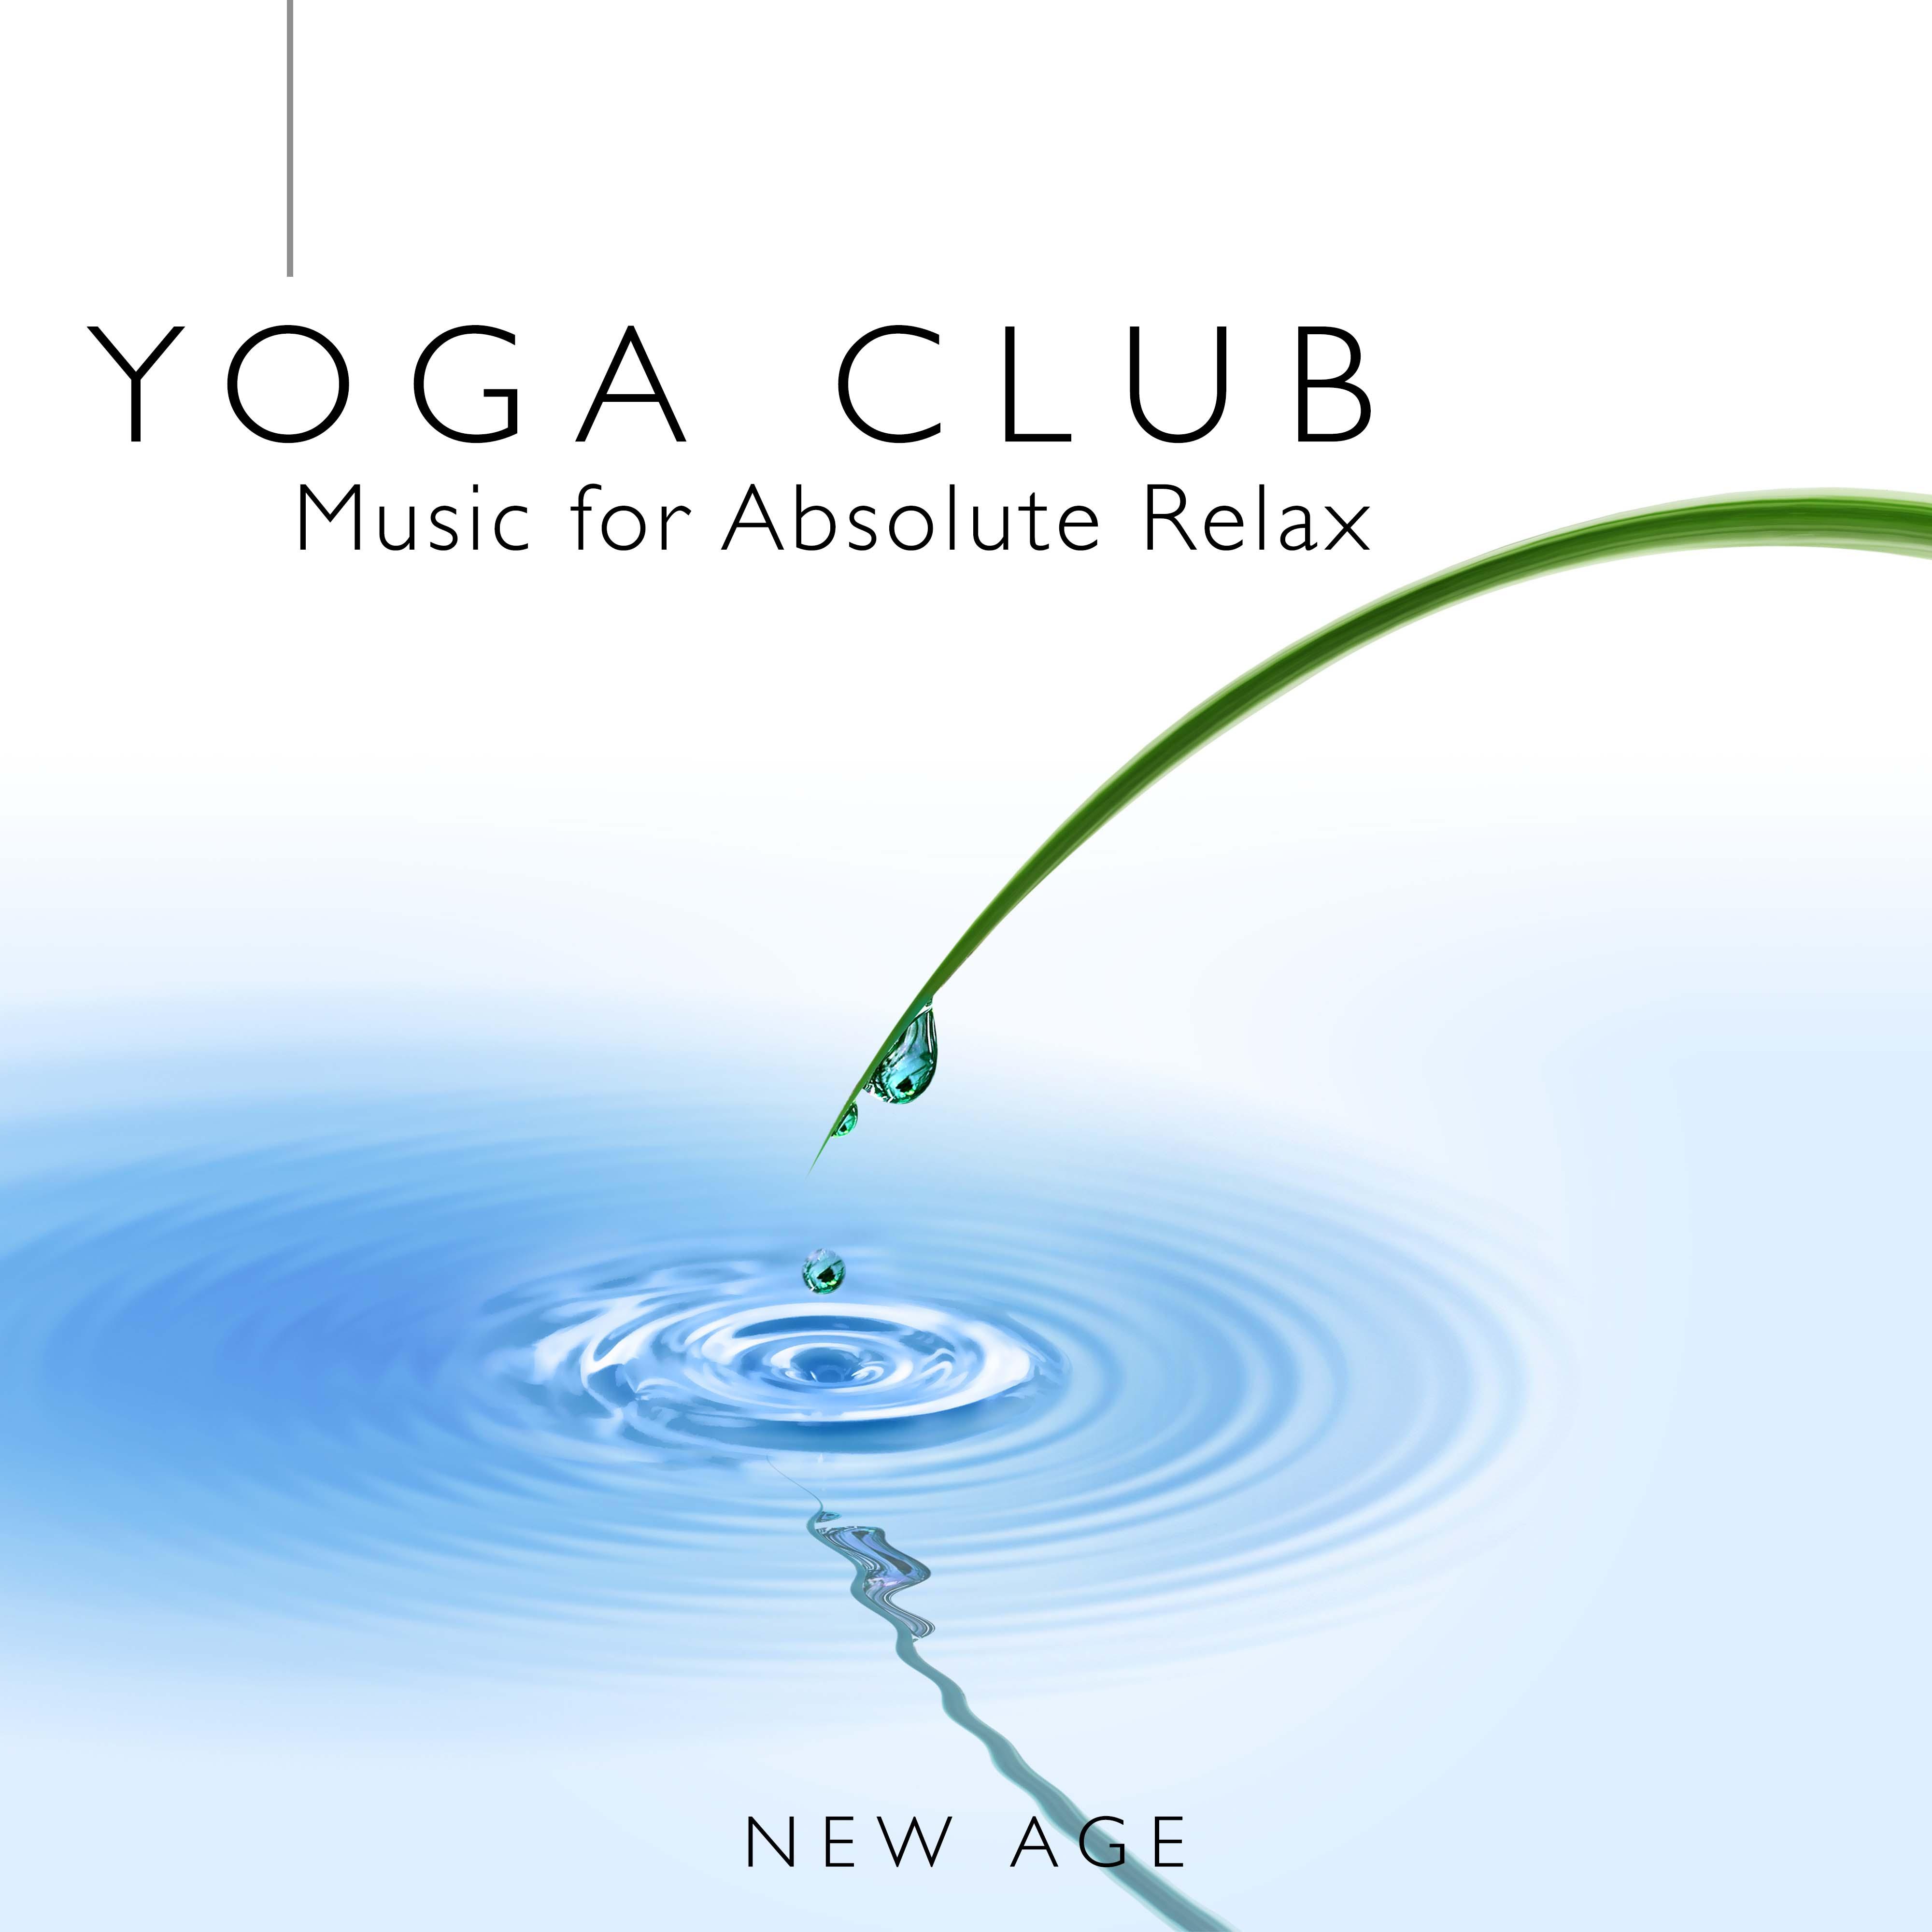 Yoga Club - Music for Absolute Relax